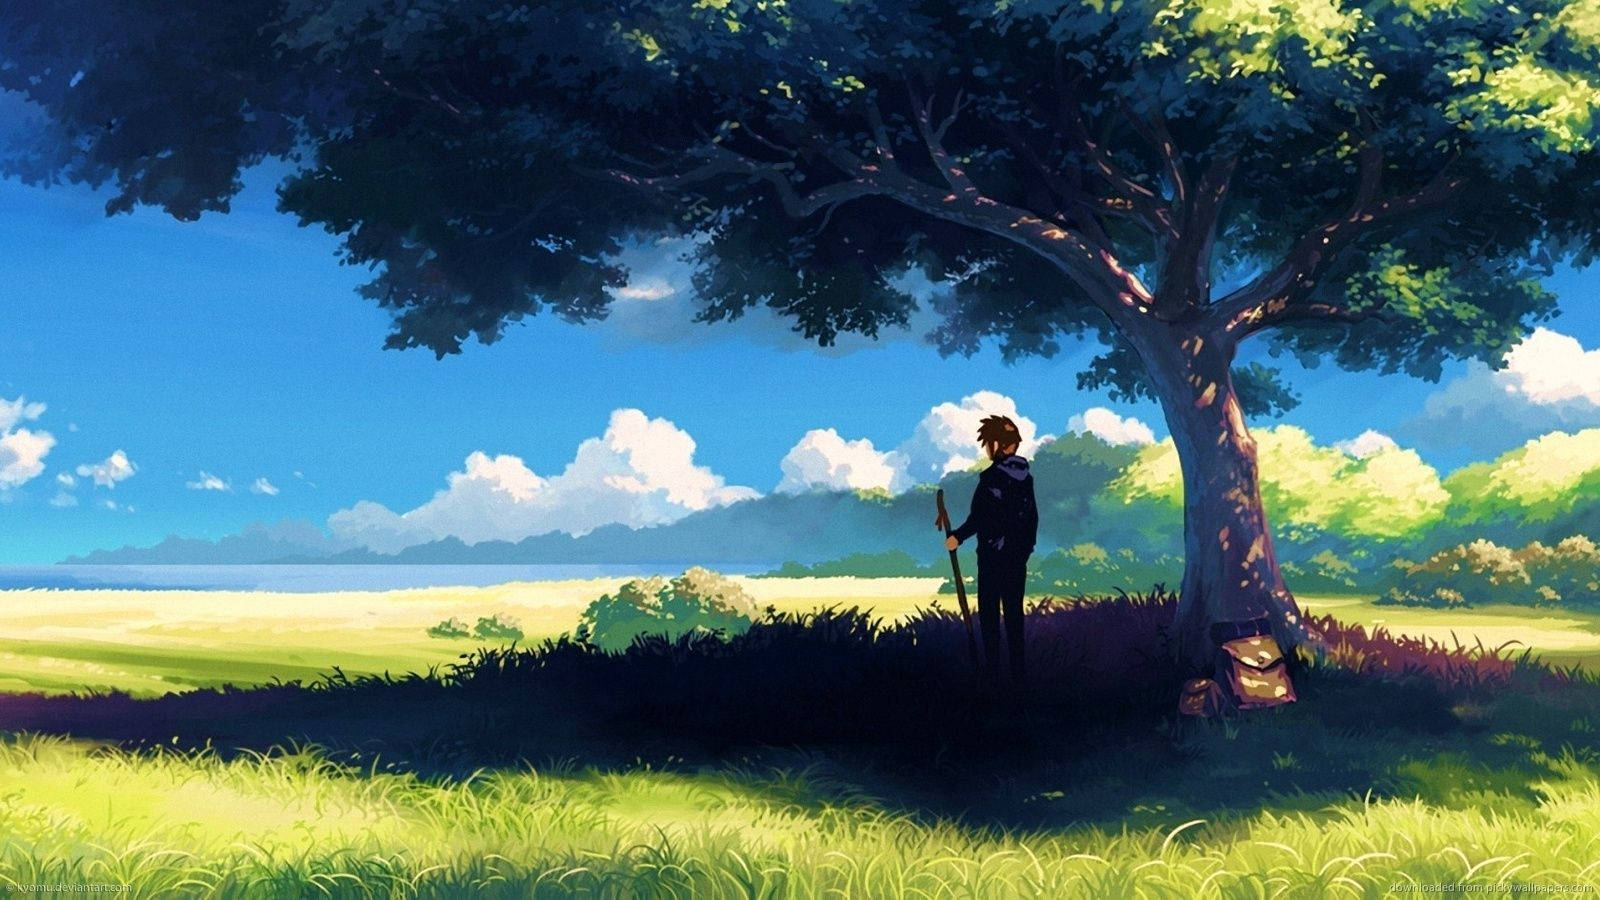 A young boy stands atop a majestic cliff, surrounded by nature. Wallpaper